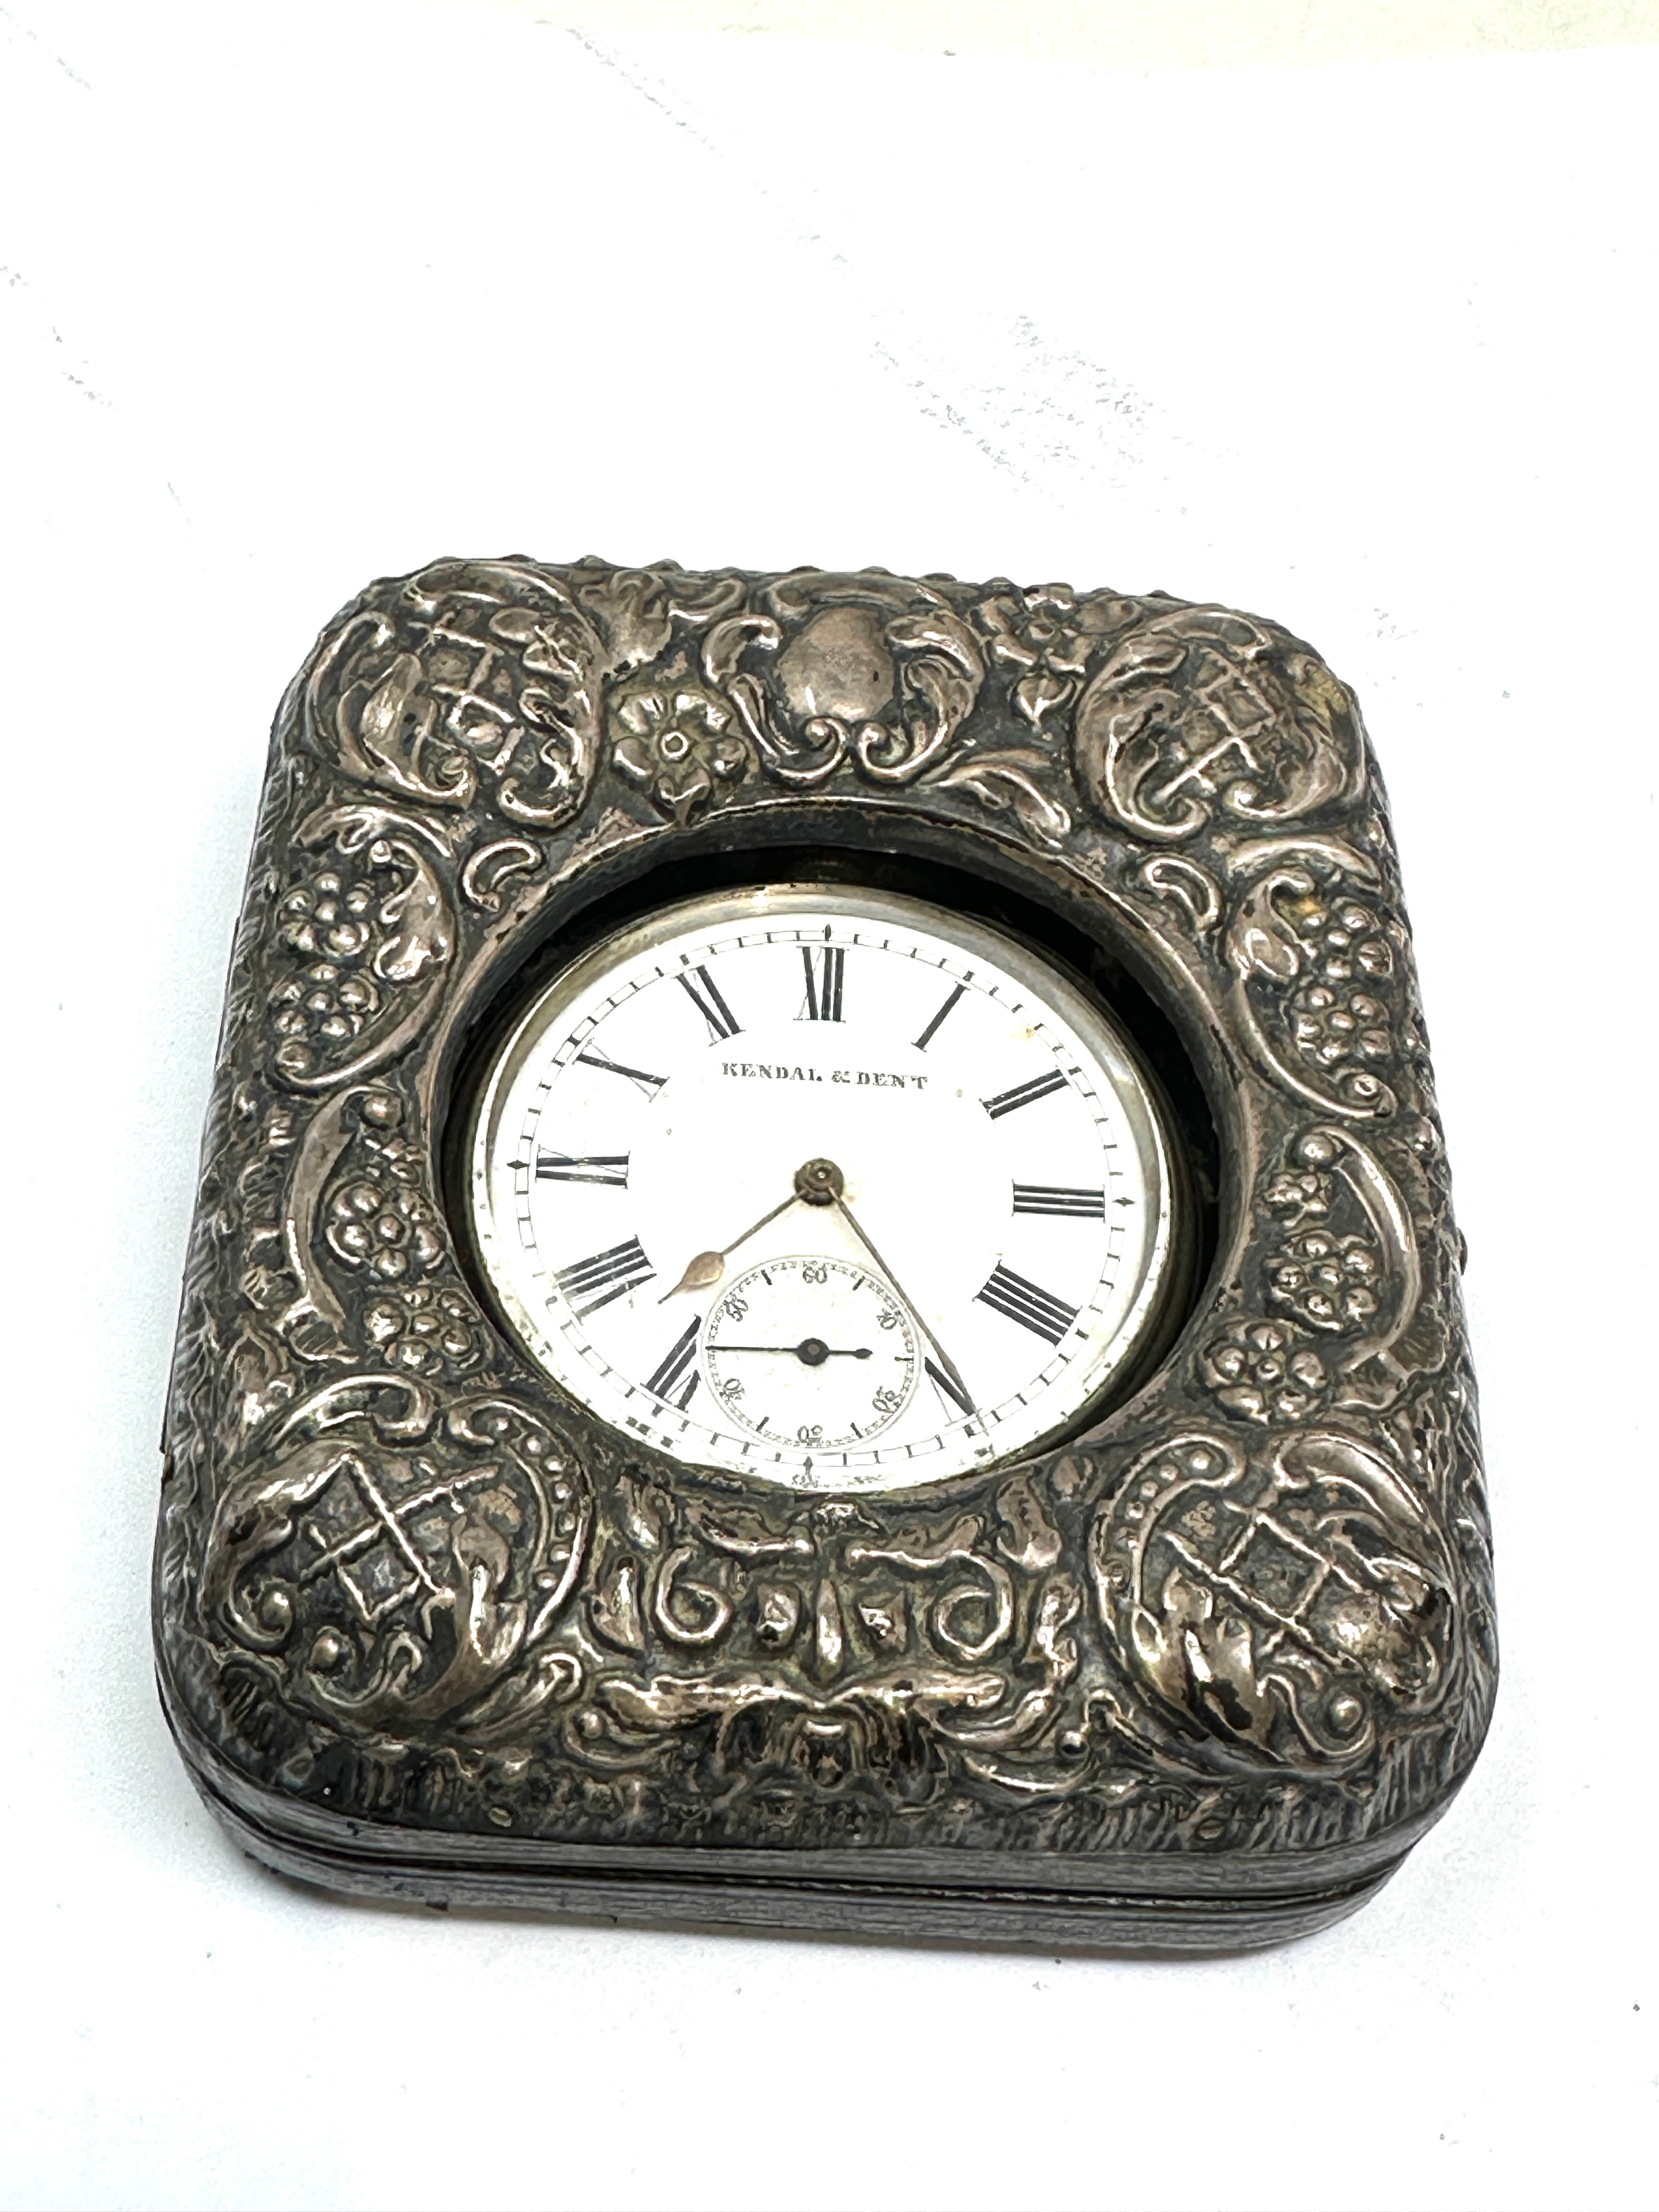 Antique silver travel case & open face pocket watch the watch is not ticking